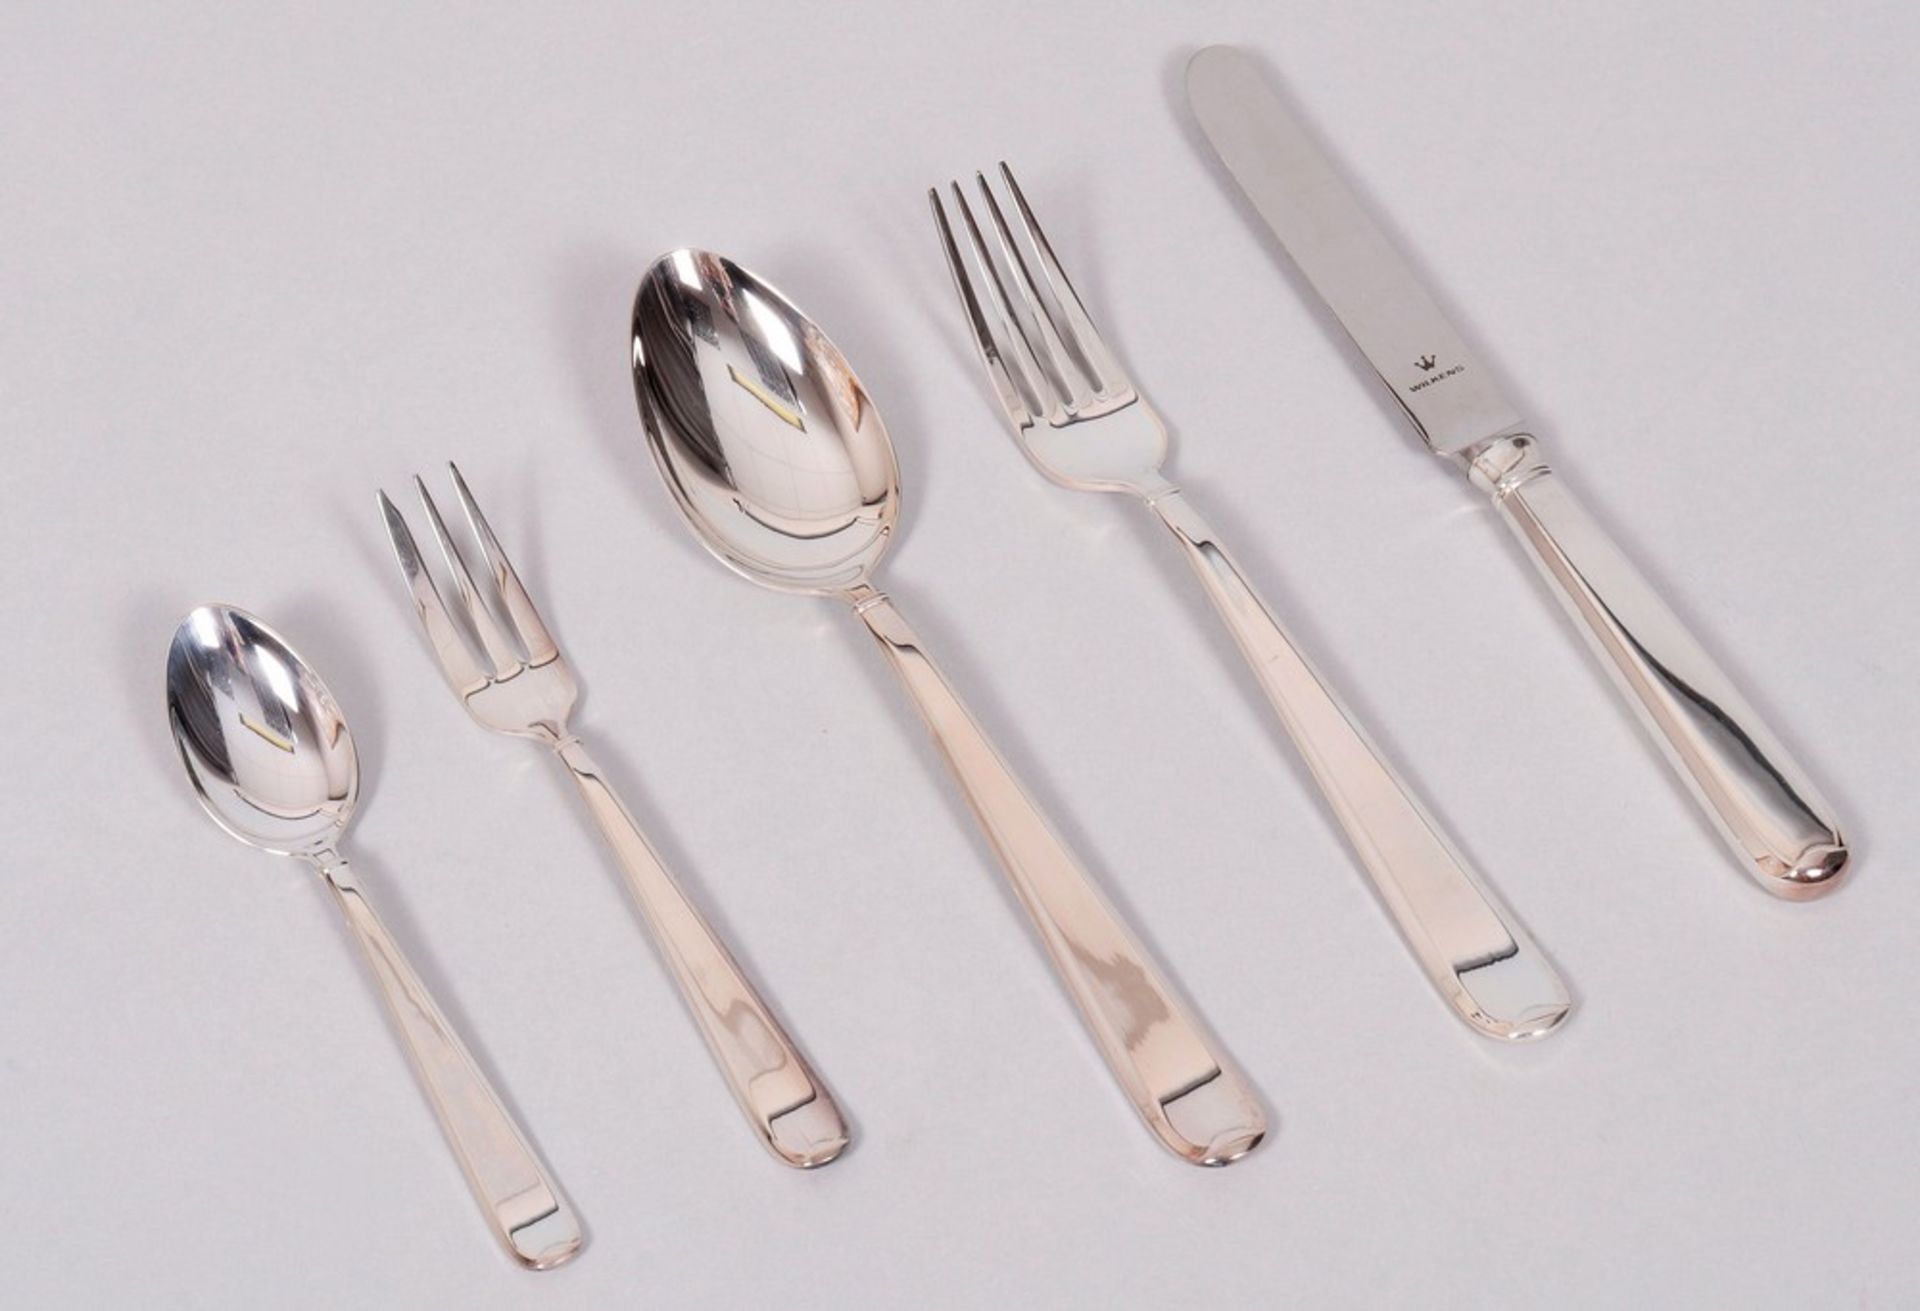 Cutlery set for 6 persons, 800 silver, Wilkens, 20th C., 41 pcs. - Image 3 of 5